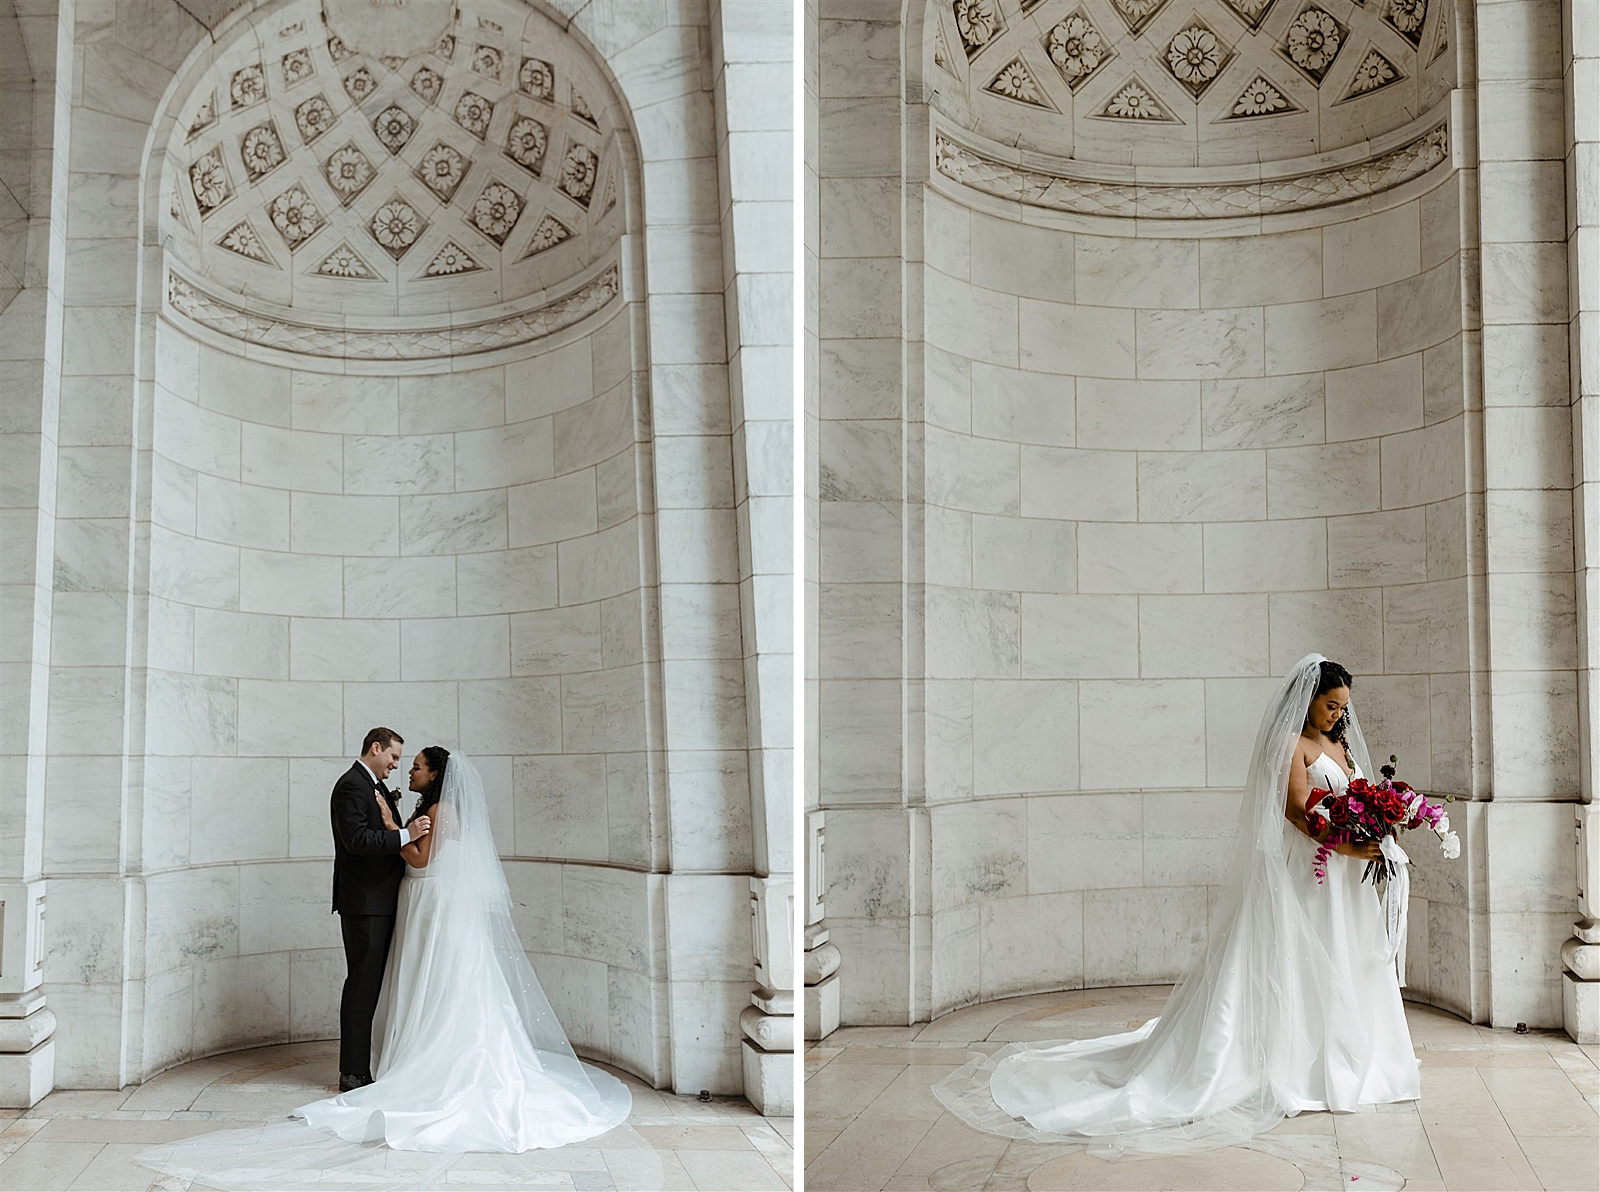 Left photo: Bride and Groom as all smiles as they embrace in front of a white marble wall in full wedding attire. 
Right photo: Bride in her wedding gown looks down at her bouquet 